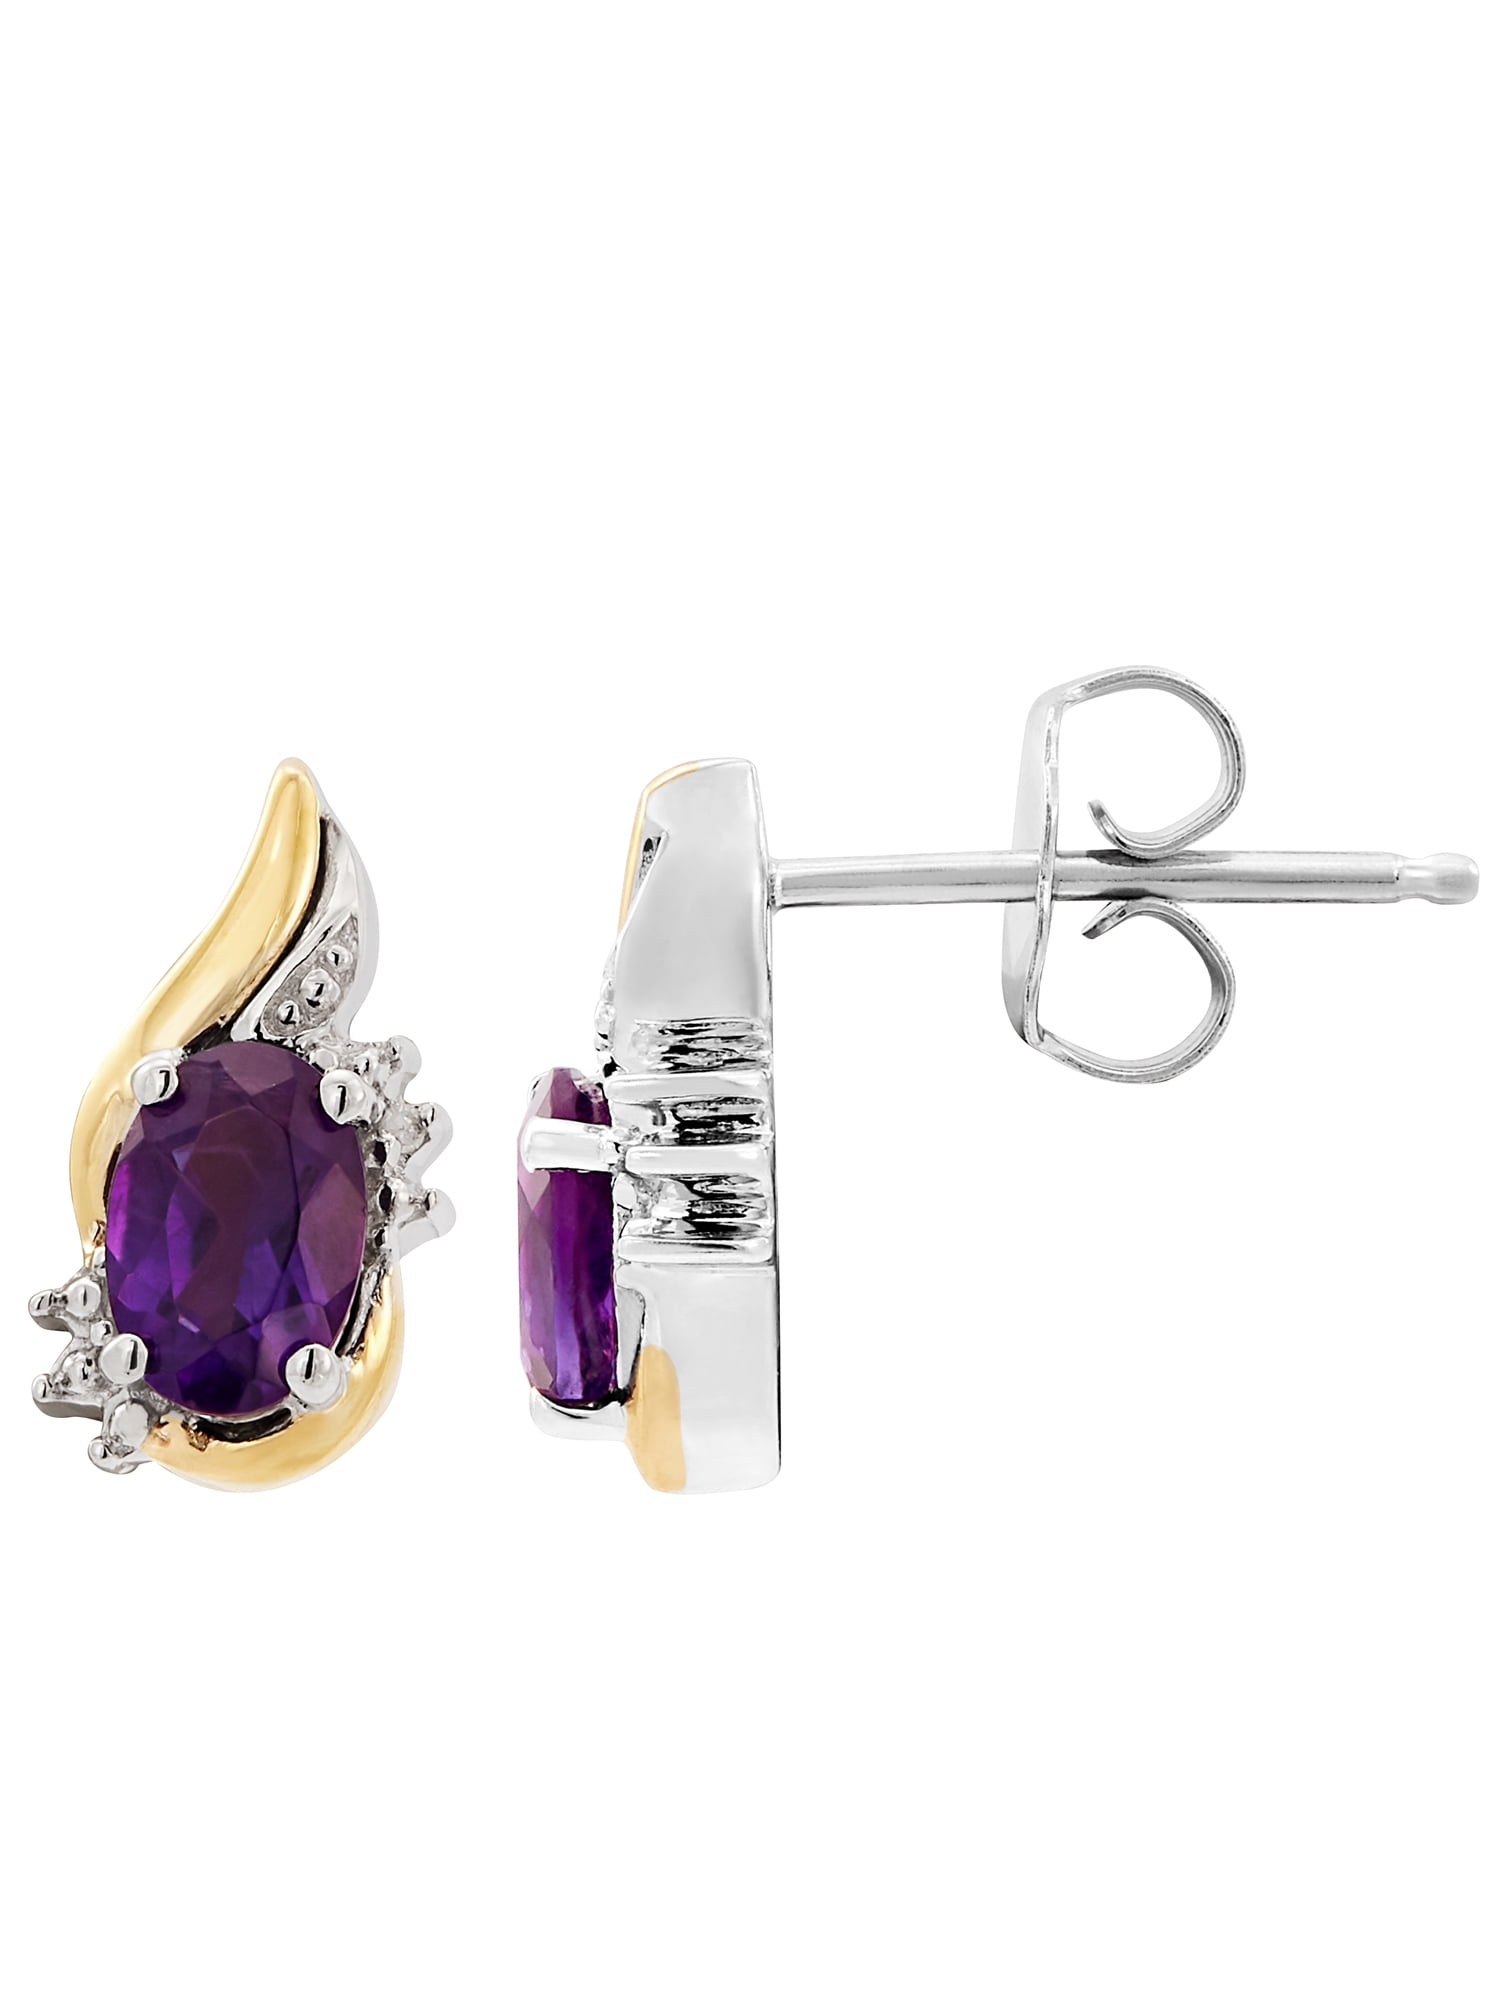 Amethyst Crystal Earrings with Accent Beads, Hypo-Allergenic Earring W